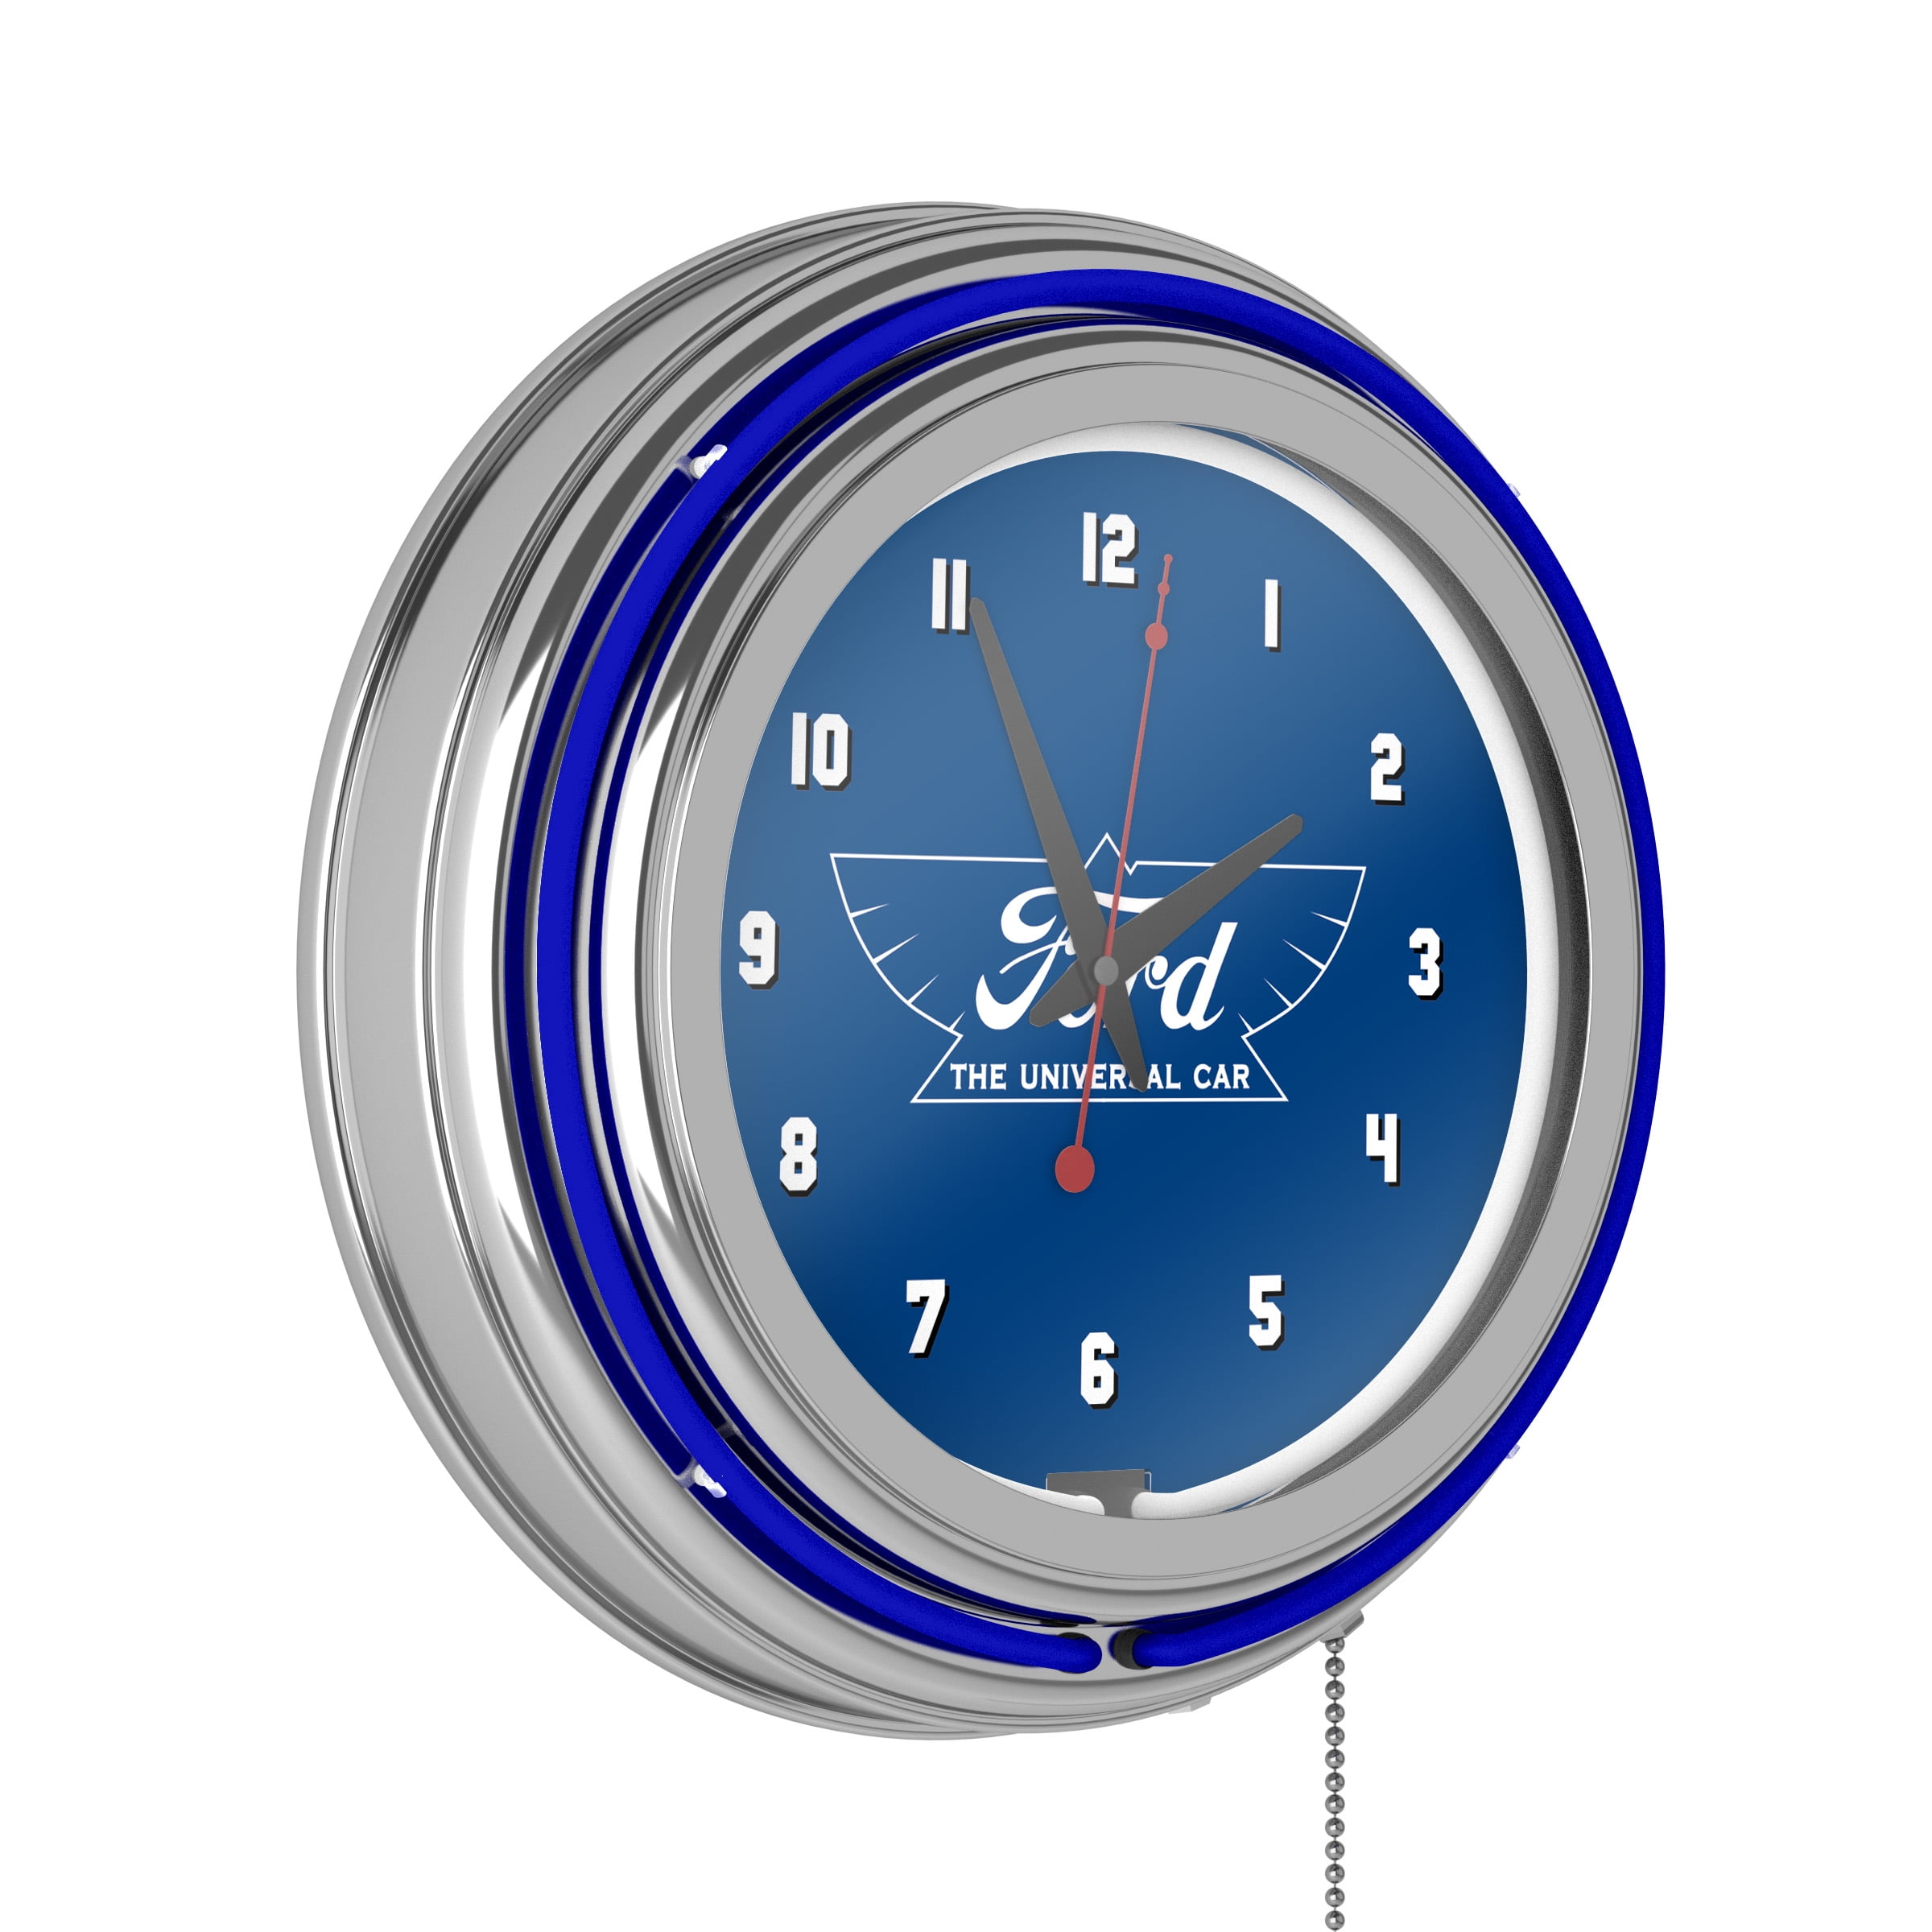 Details about   FORD PERFORMANCE LOGO 15" Neon Wall Clock Glass Face Chrome Plate Warranty New 